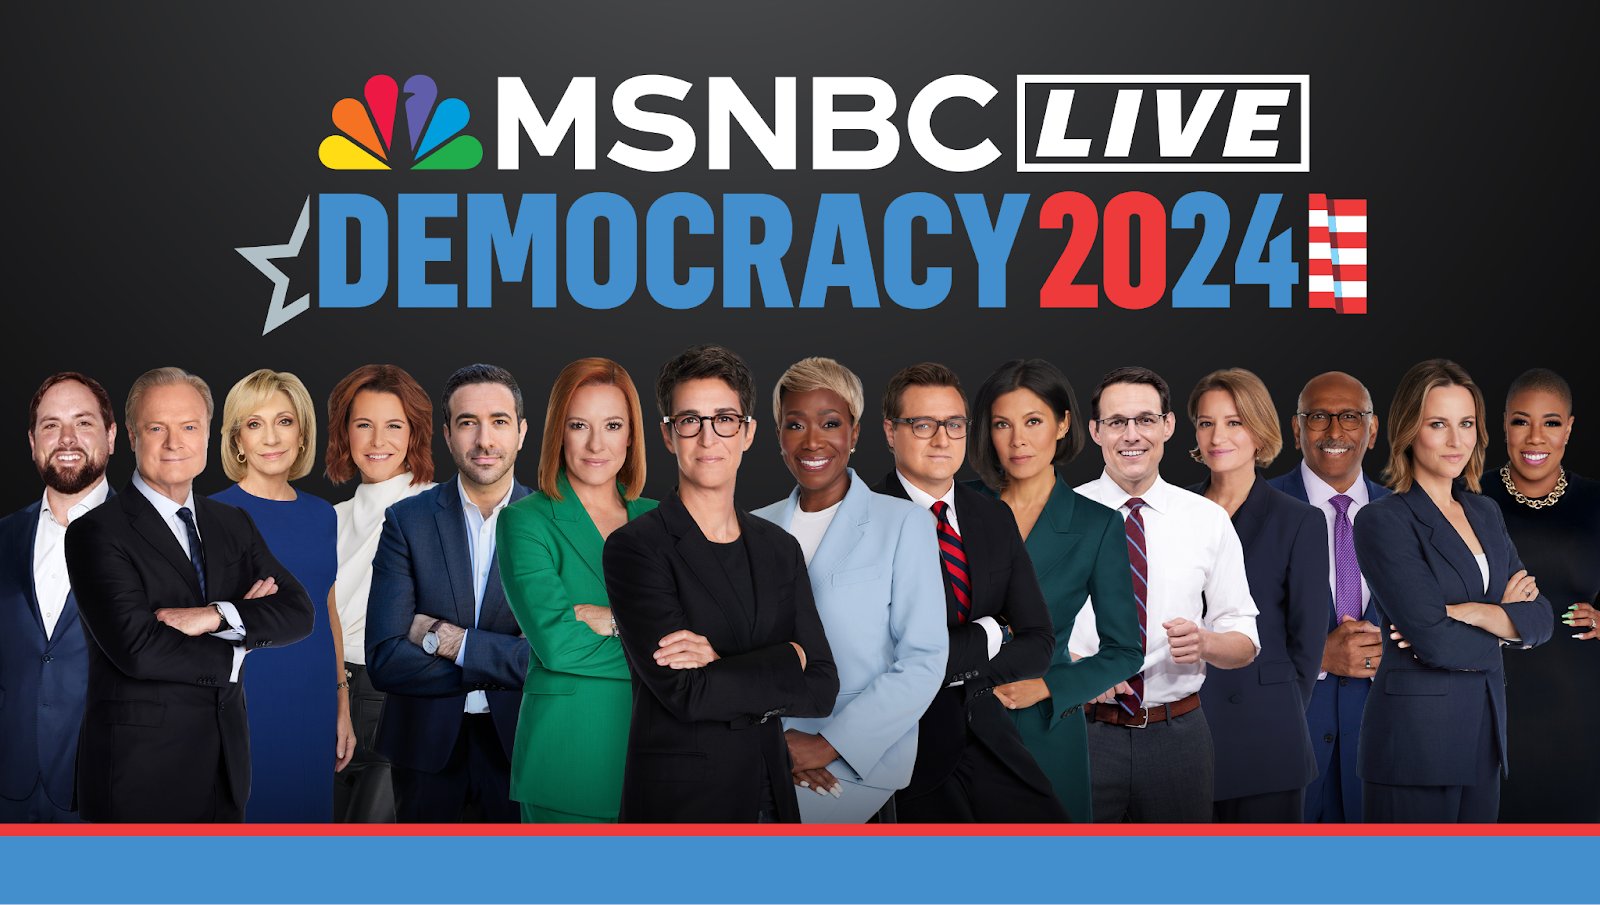 MSNBC planning ‘Democracy 2024’ event before 2024 election [Video]